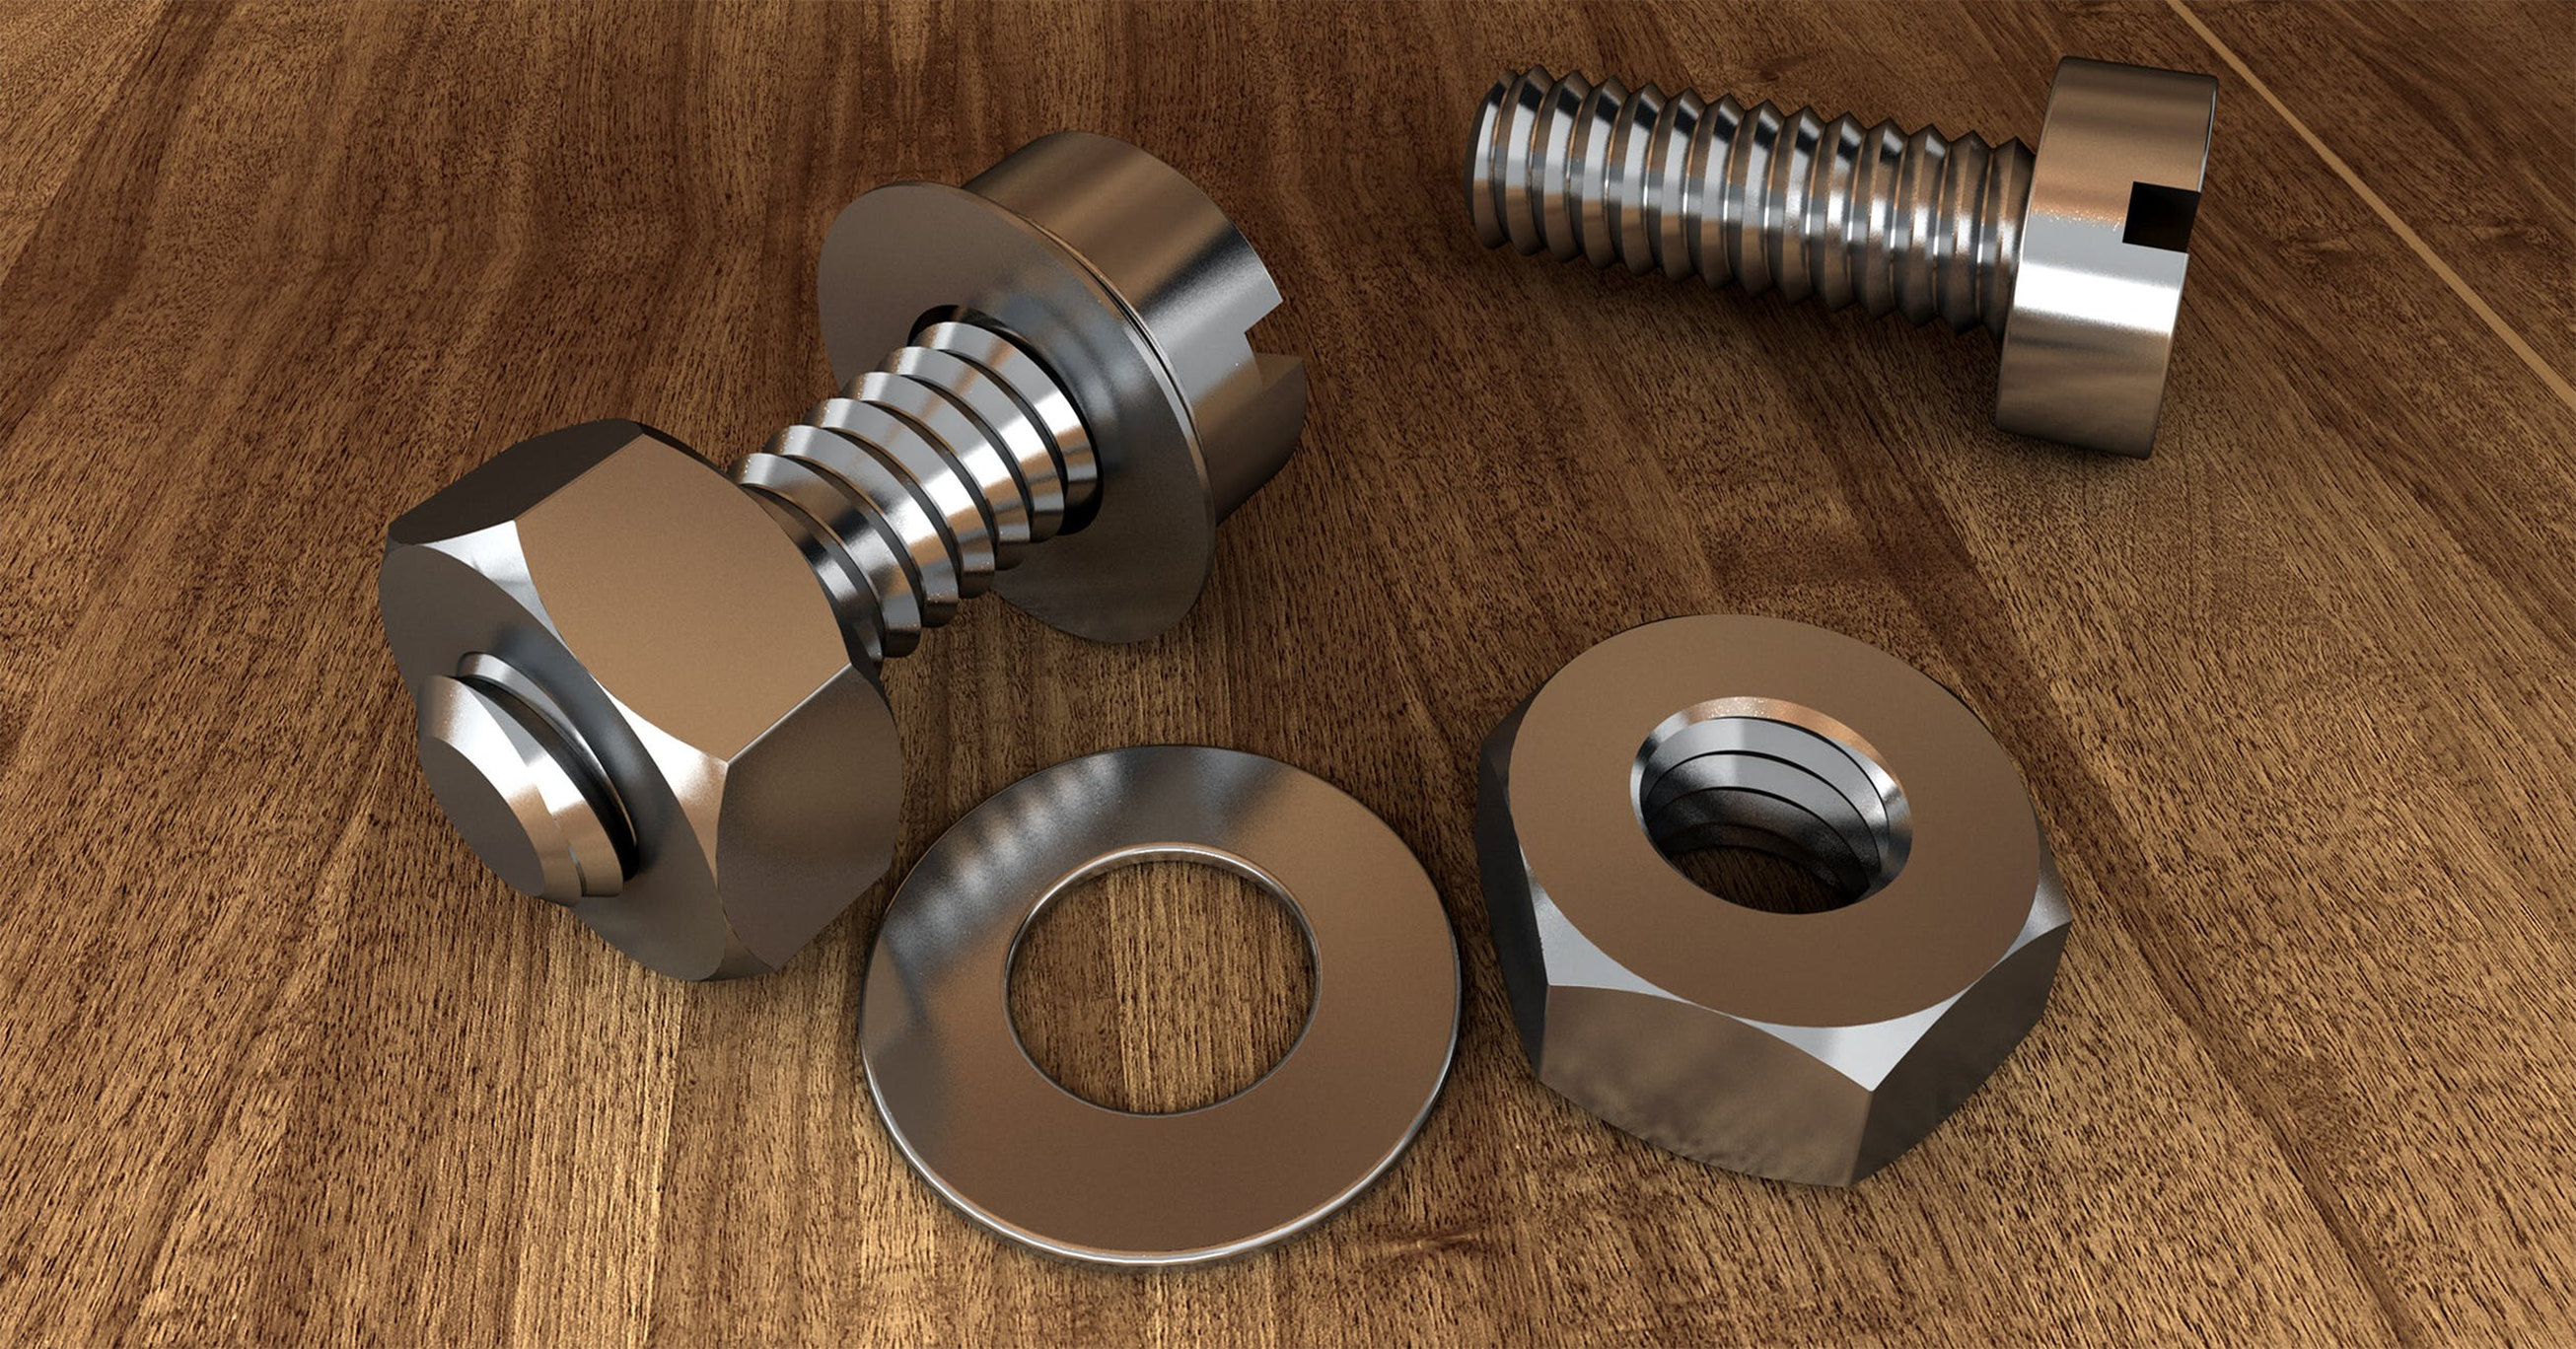 NUTS, BOLTS & WASHERS